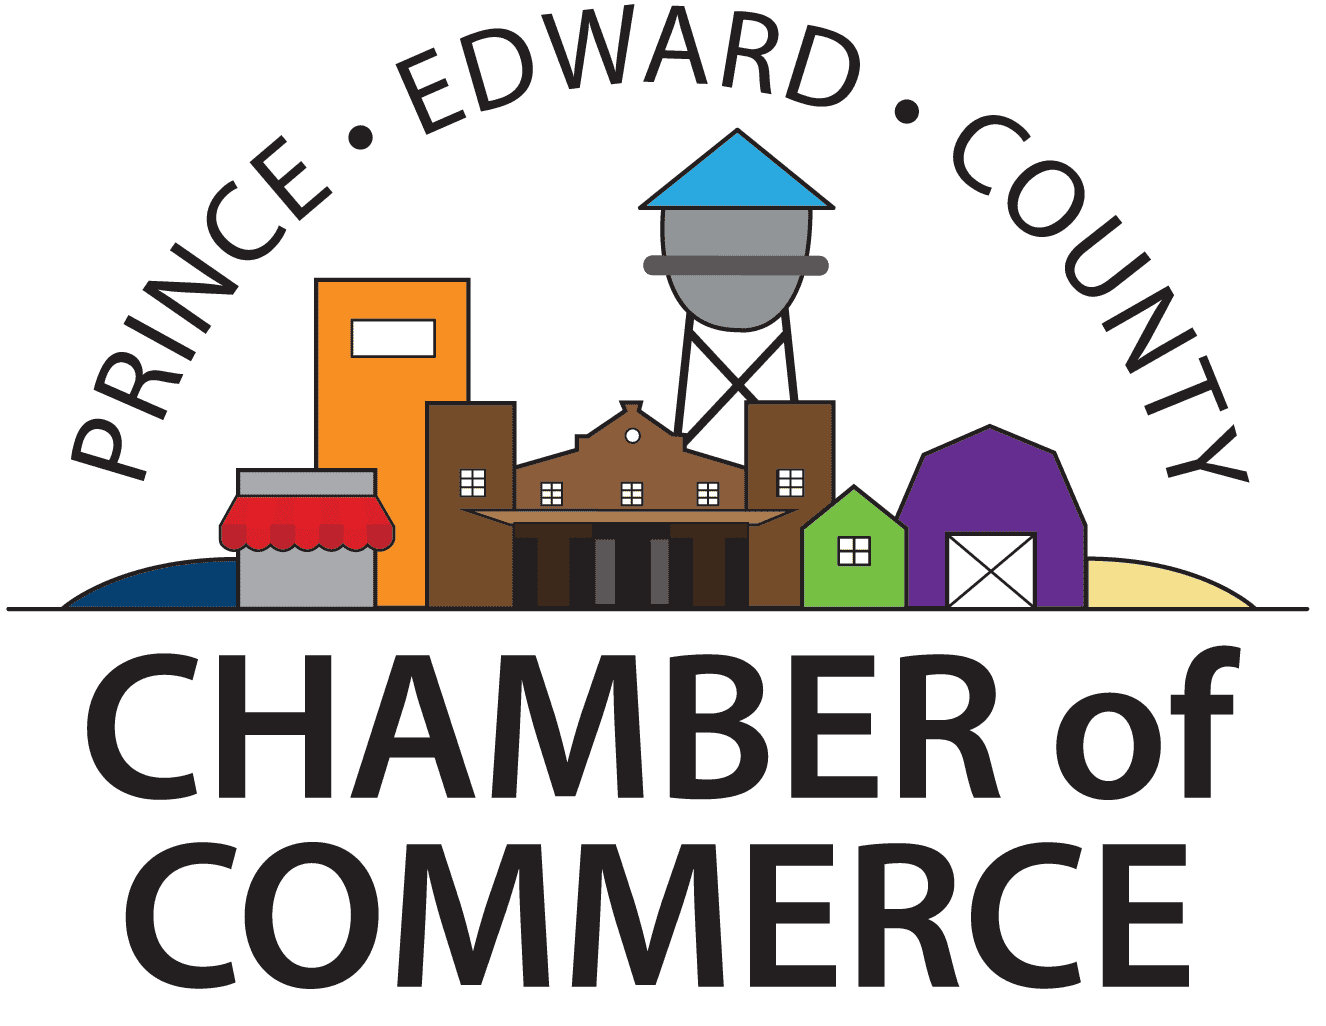 Case Study: Prince Edward County Chamber of Commerce